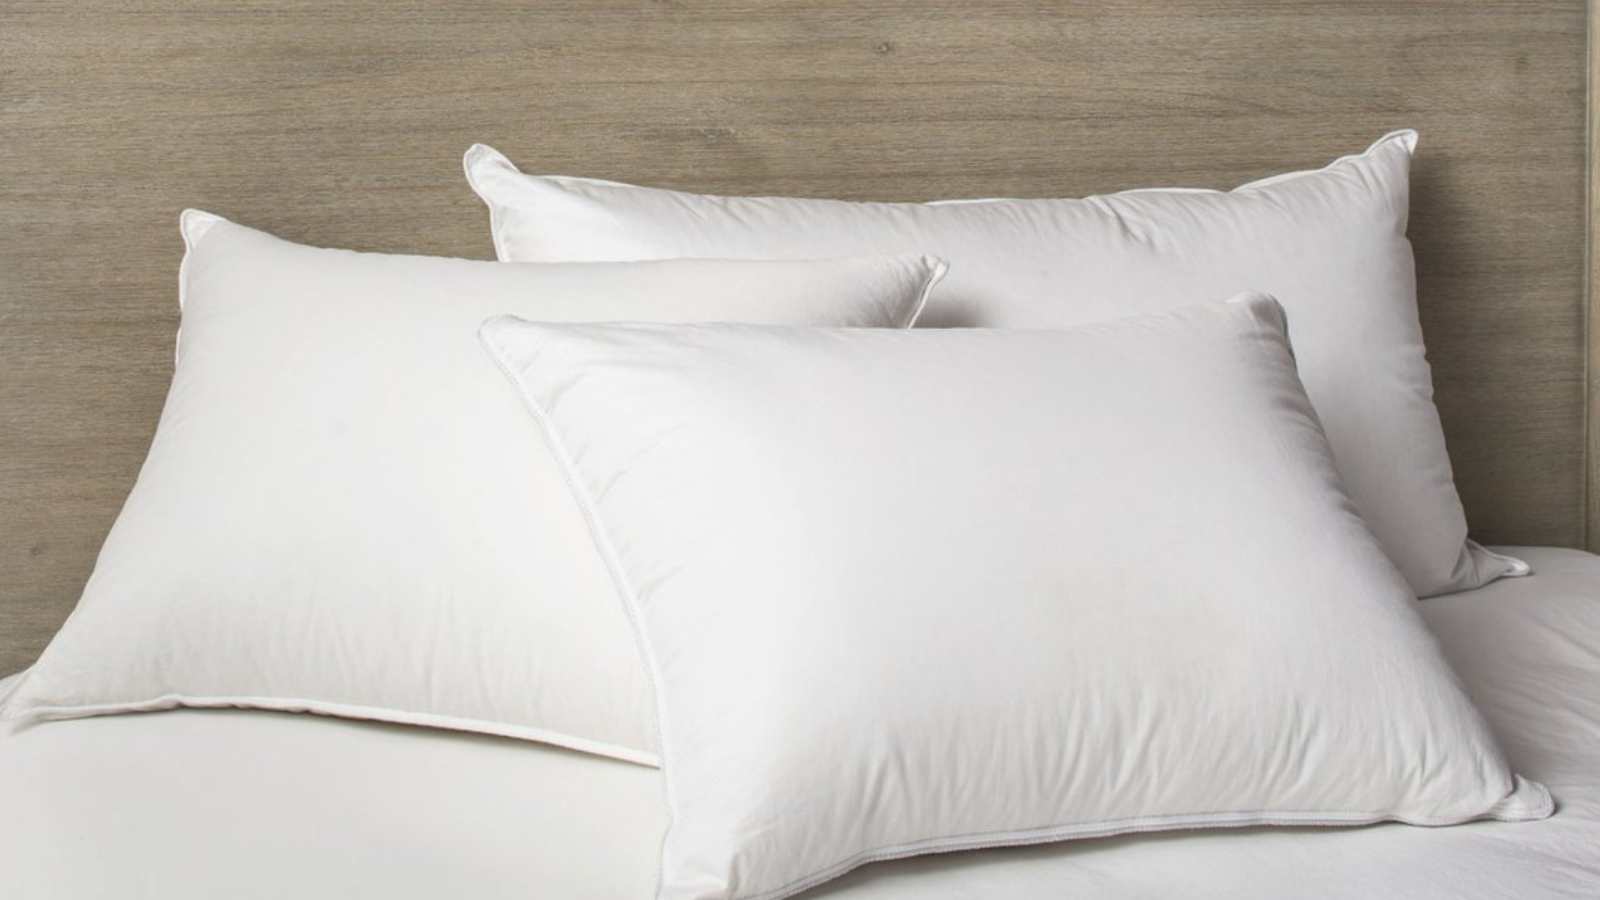 comfy pillows for bed